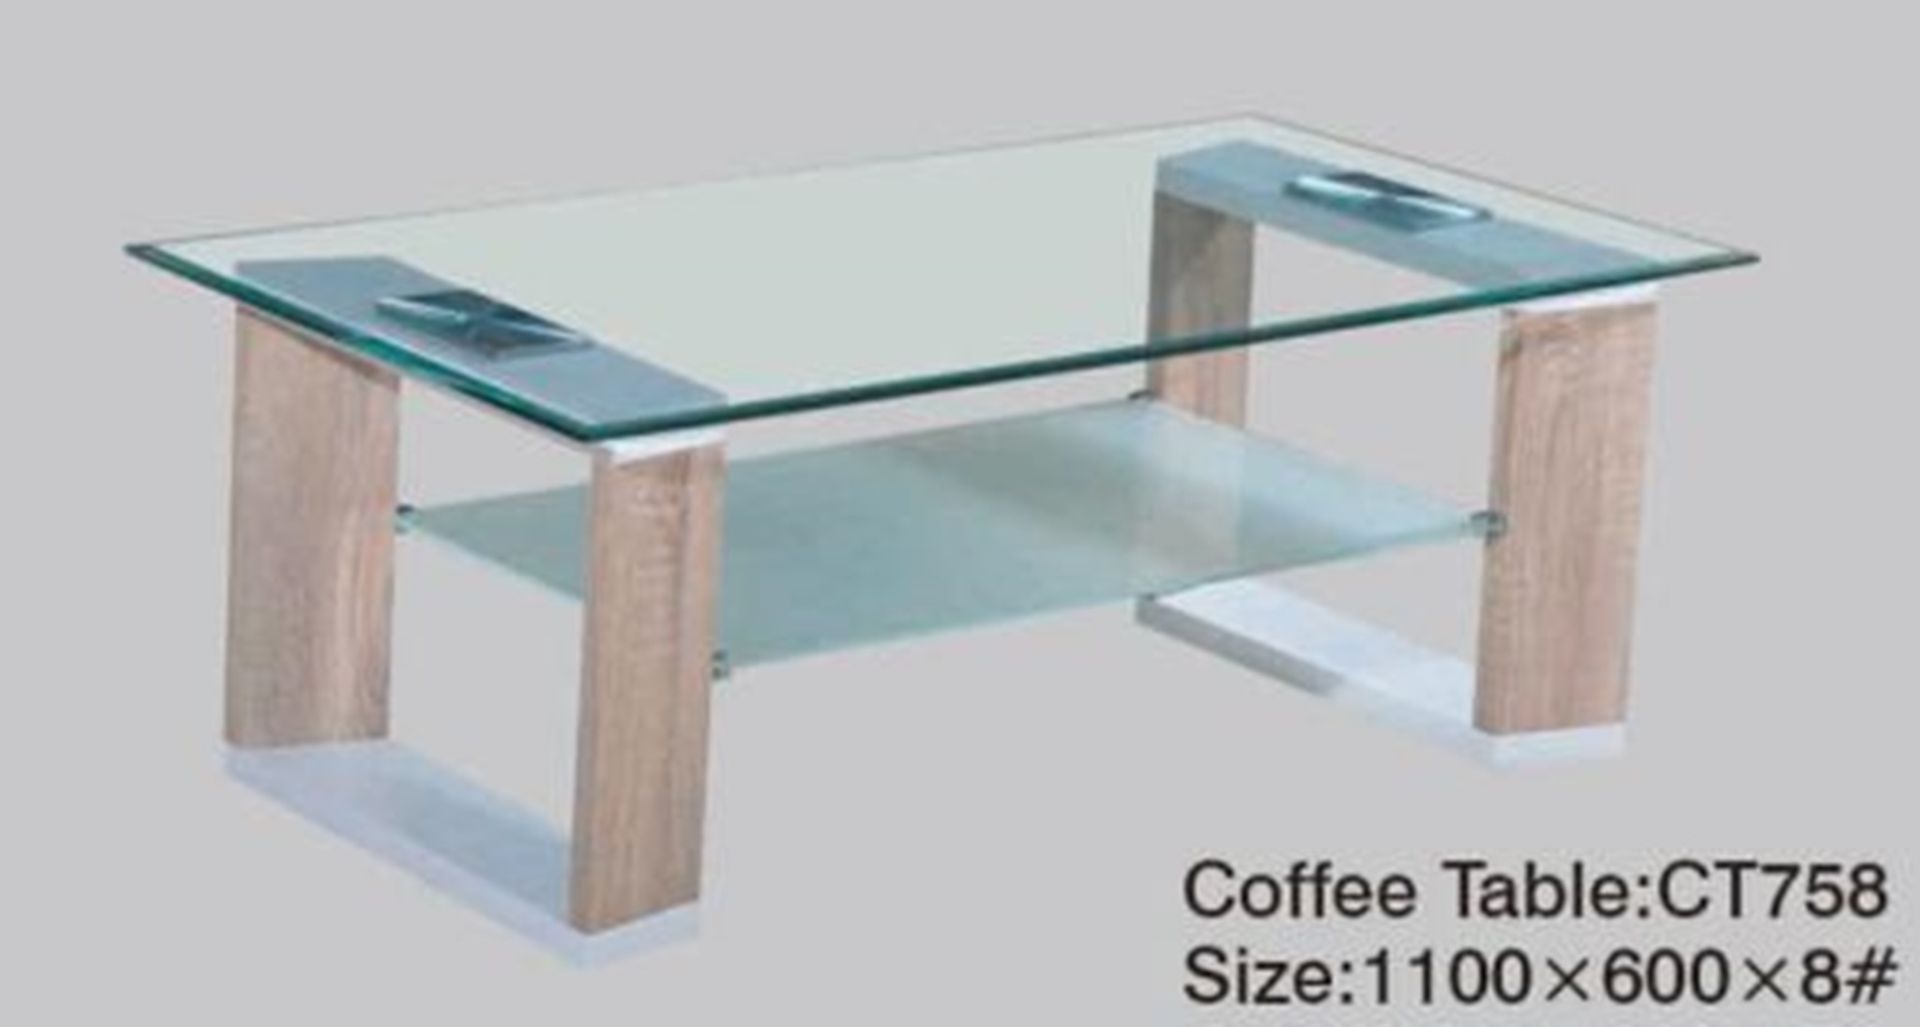 1 BRAND NEW BOXED HOMESTUFF PLUS CLEAR GLASS AND LIGHT WOOD COFFEE TABLE CT756